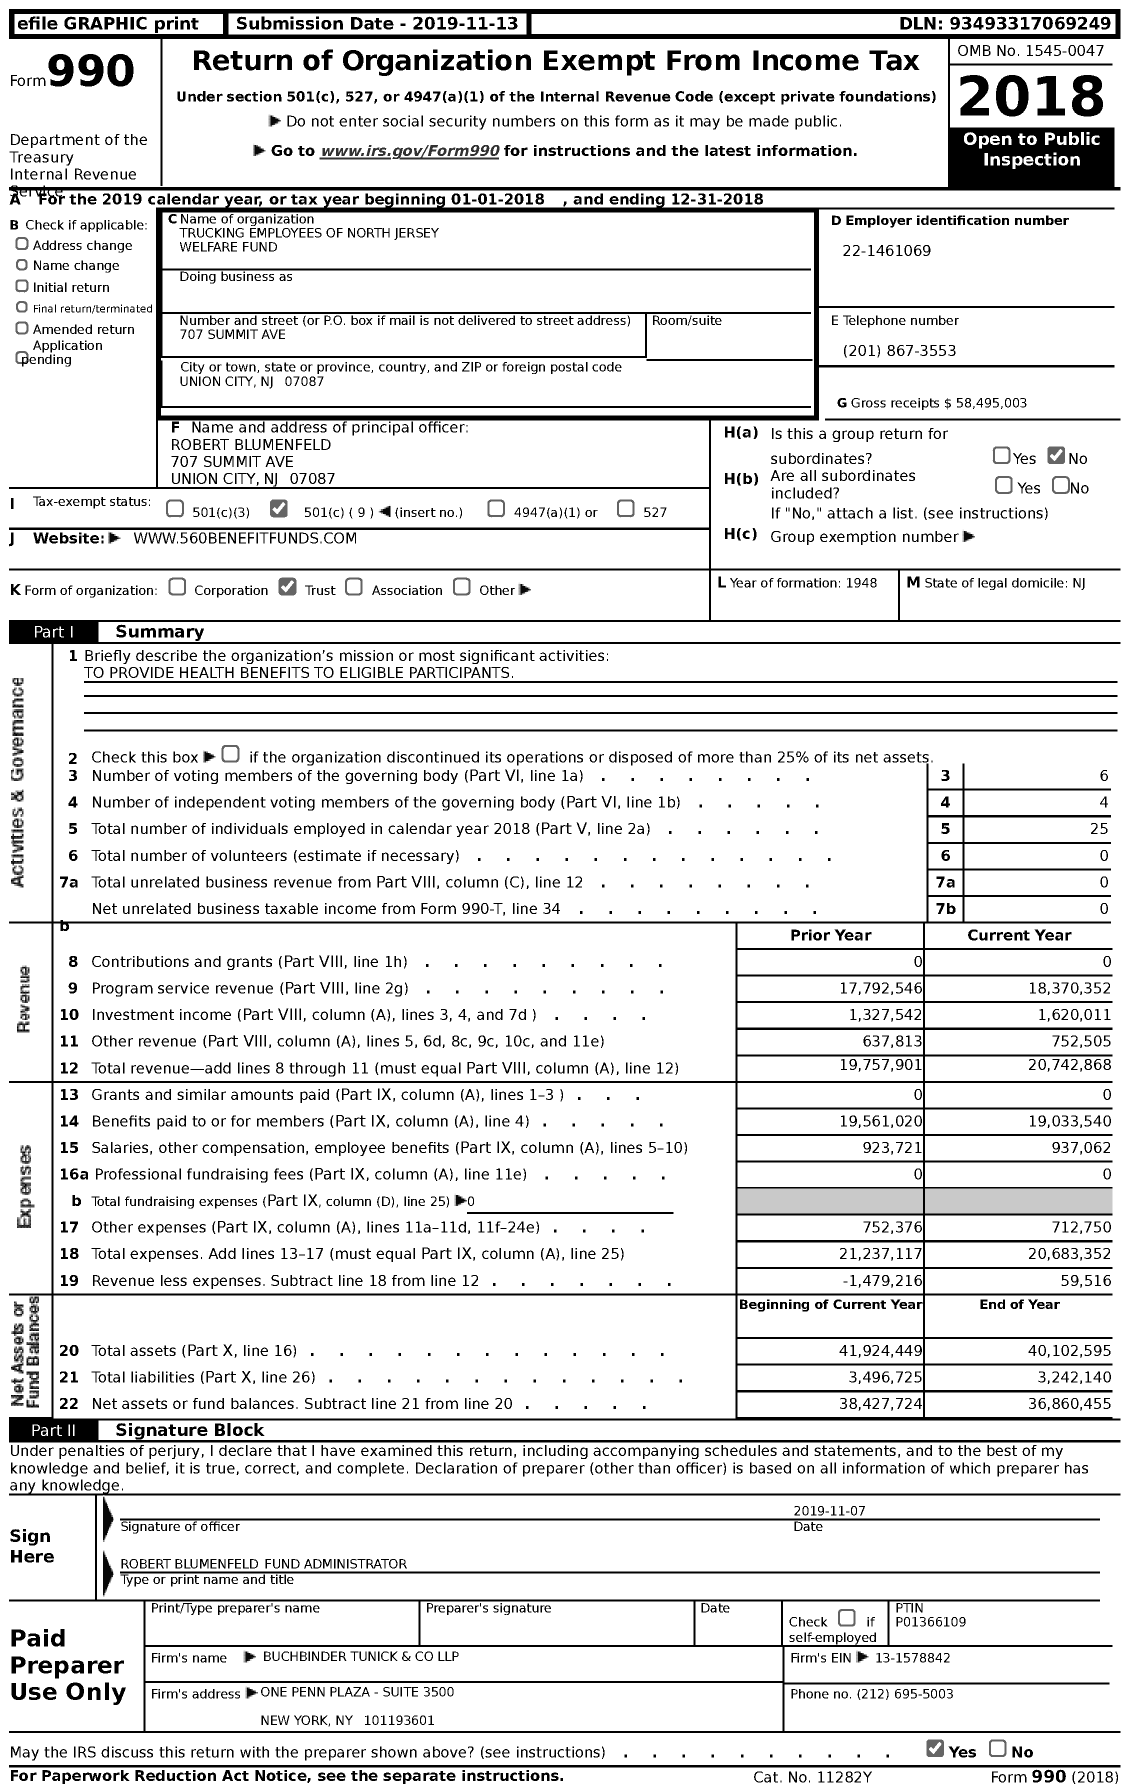 Image of first page of 2018 Form 990 for Trucking Employees of North Jersey Welfare Fund